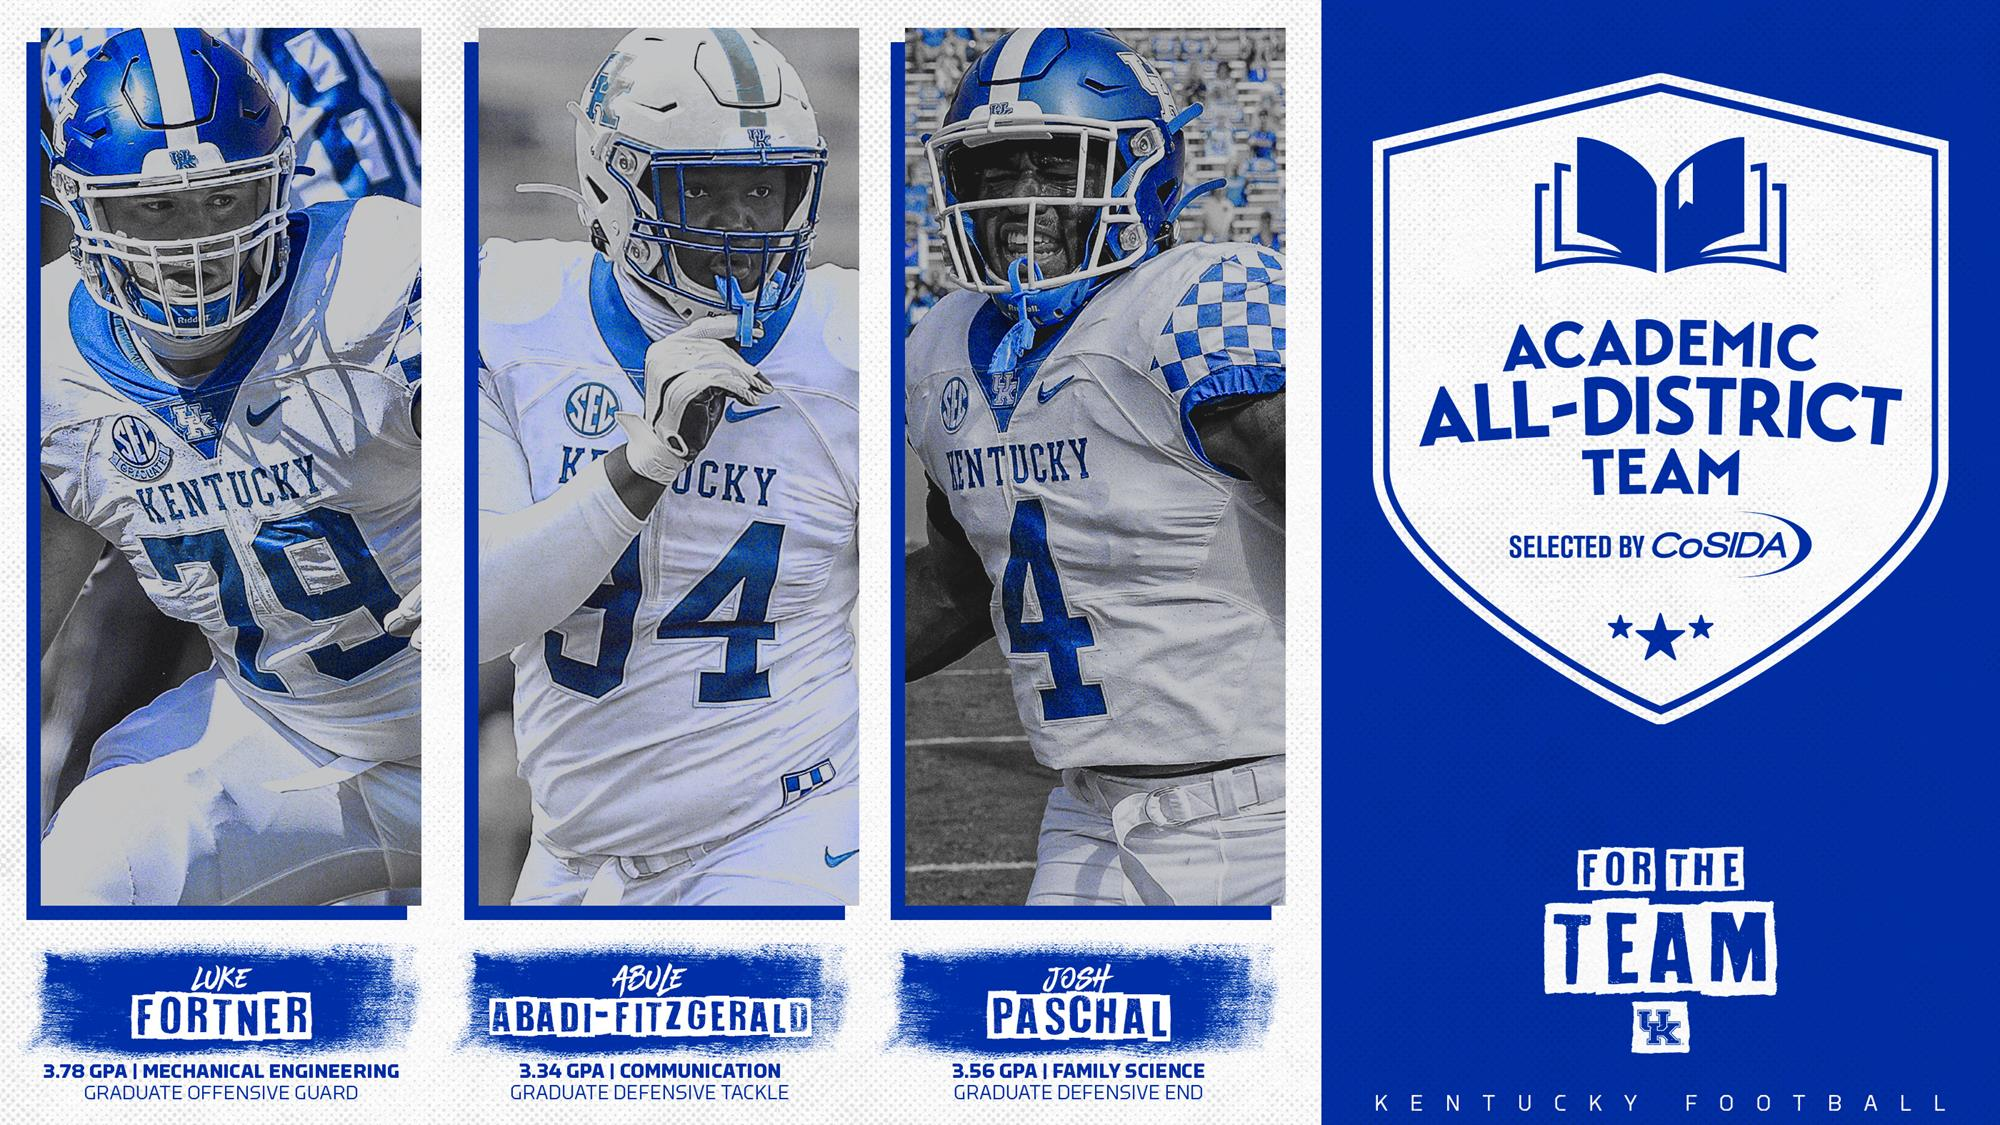 Three Wildcats Named to CoSIDA Academic All-District Team